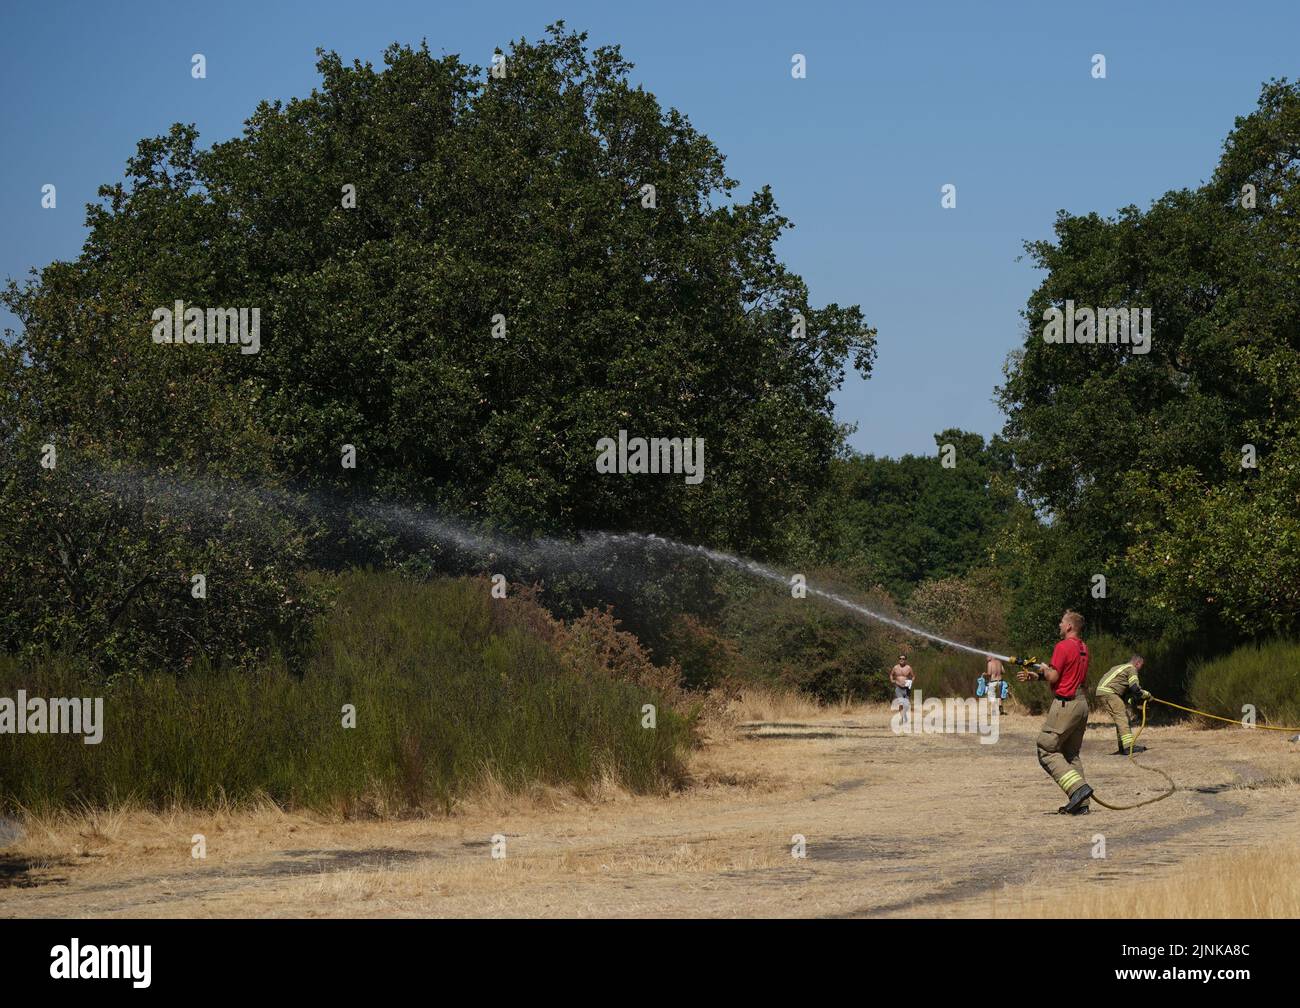 Firefighters battle a grass fire on Leyton flats in east London, as a drought has been declared for parts of England following the driest summer for 50 years. Picture date: Friday August 12, 2022. Stock Photo